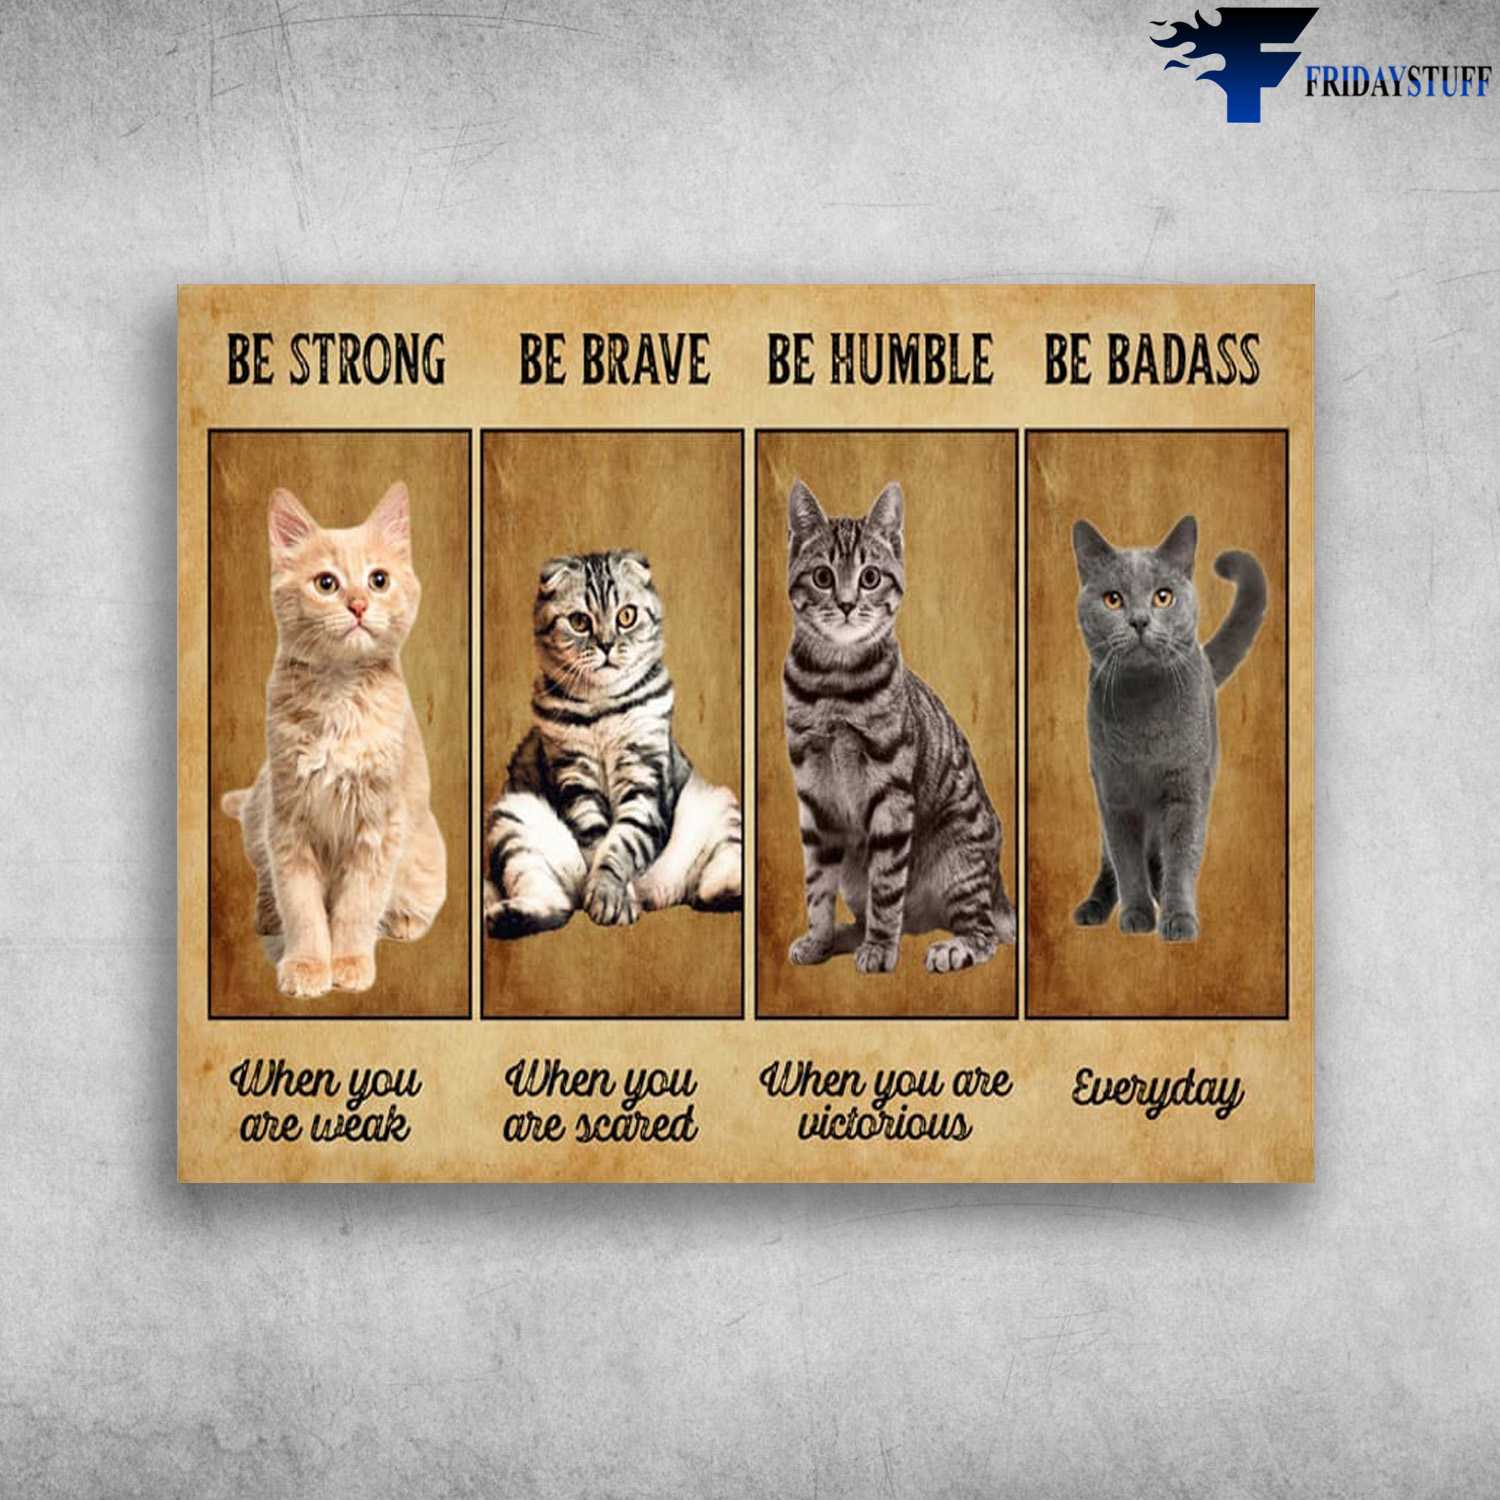 Cat Lover, Cat Poster, Be Strong When You Are Weak, Be Brave When You Are Scared, Be Humble When You Are Victorious, Be Badass Everyday